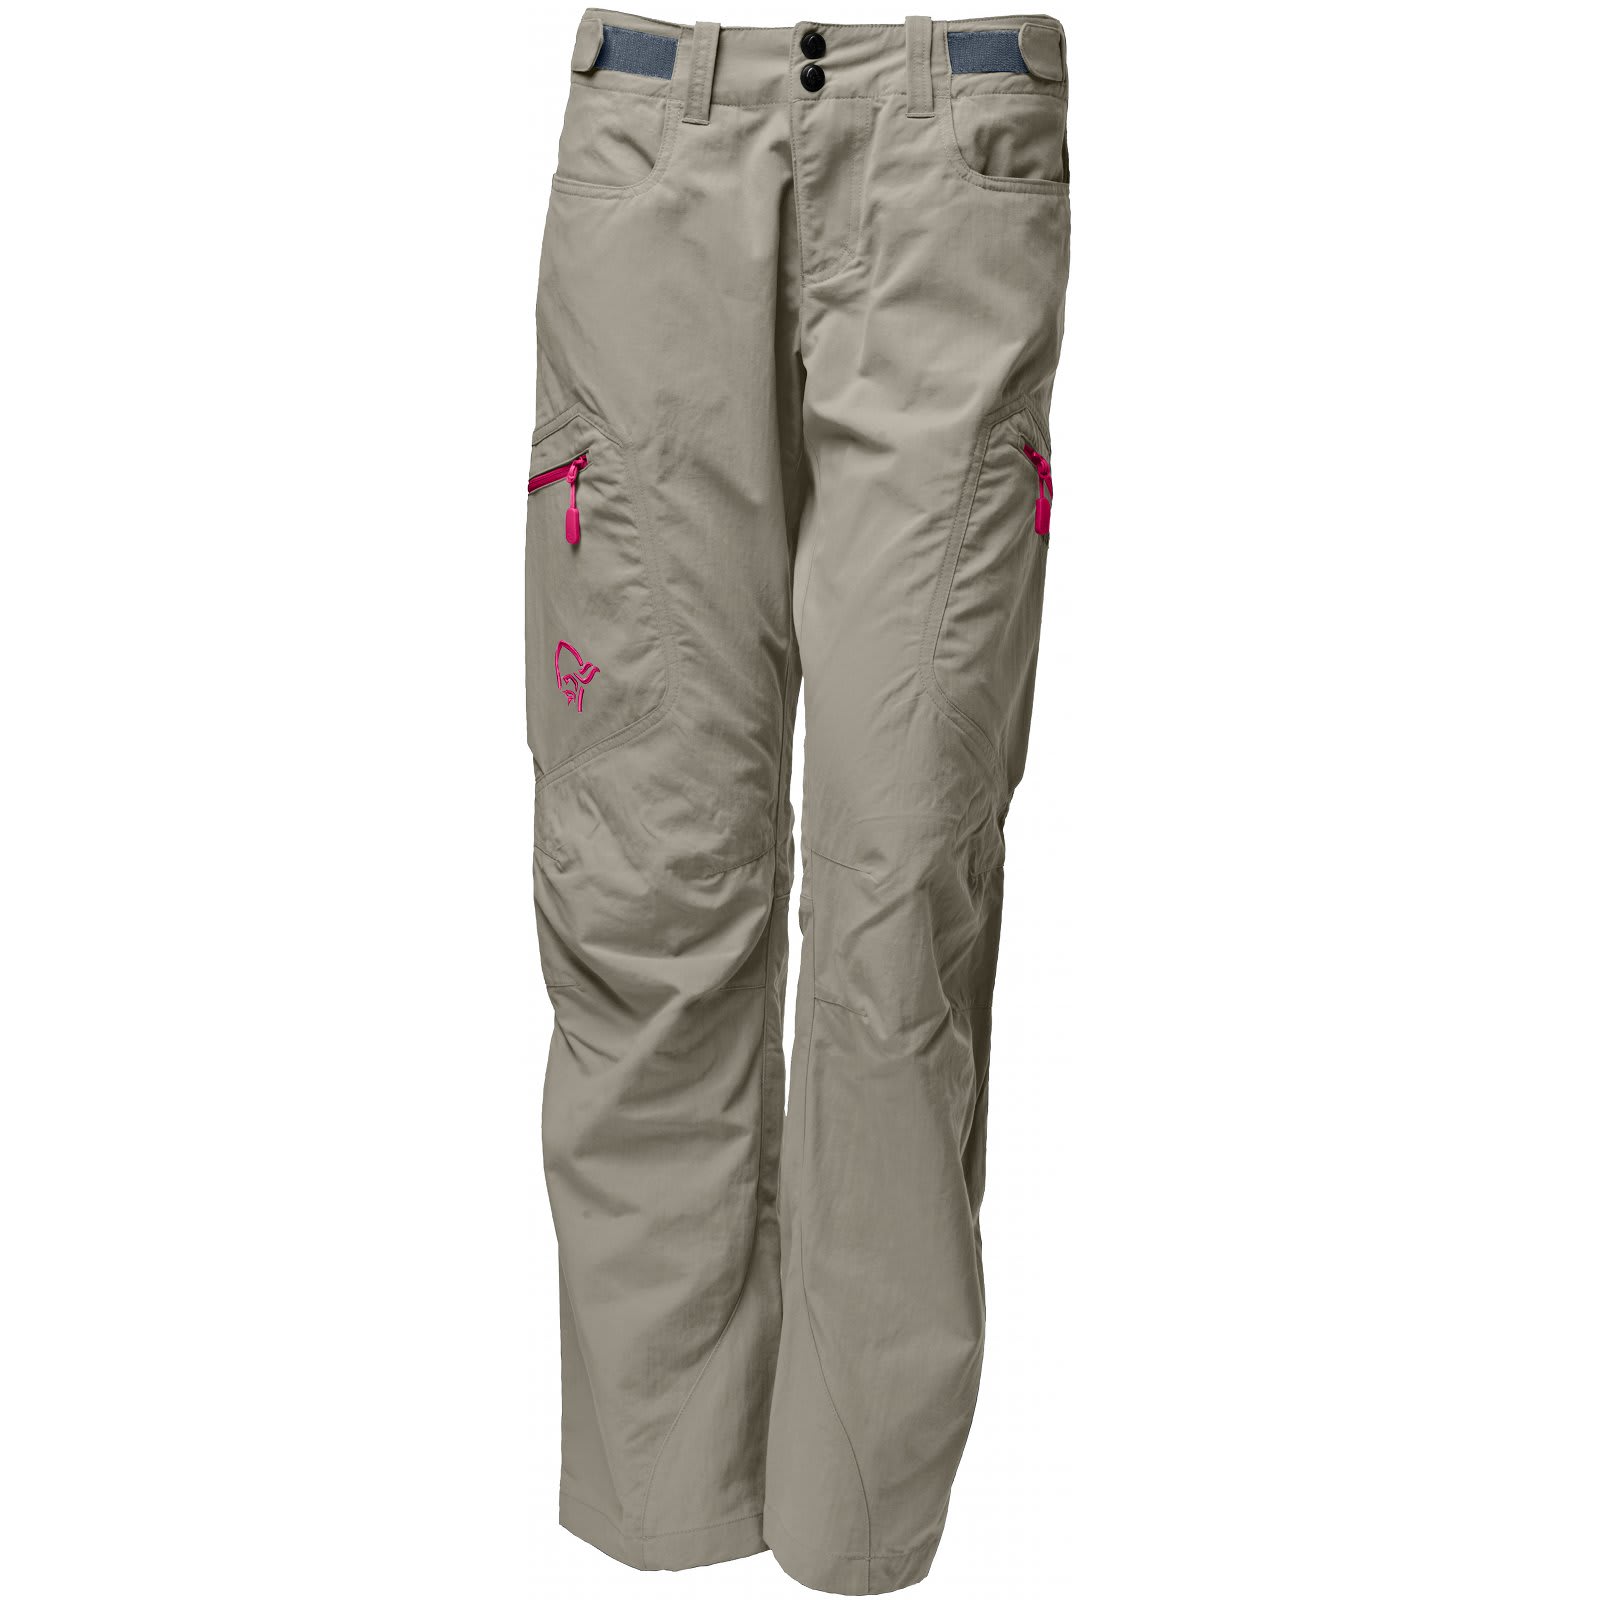 Buy Norrøna Svalbard Midweight Pants Women's from Outnorth